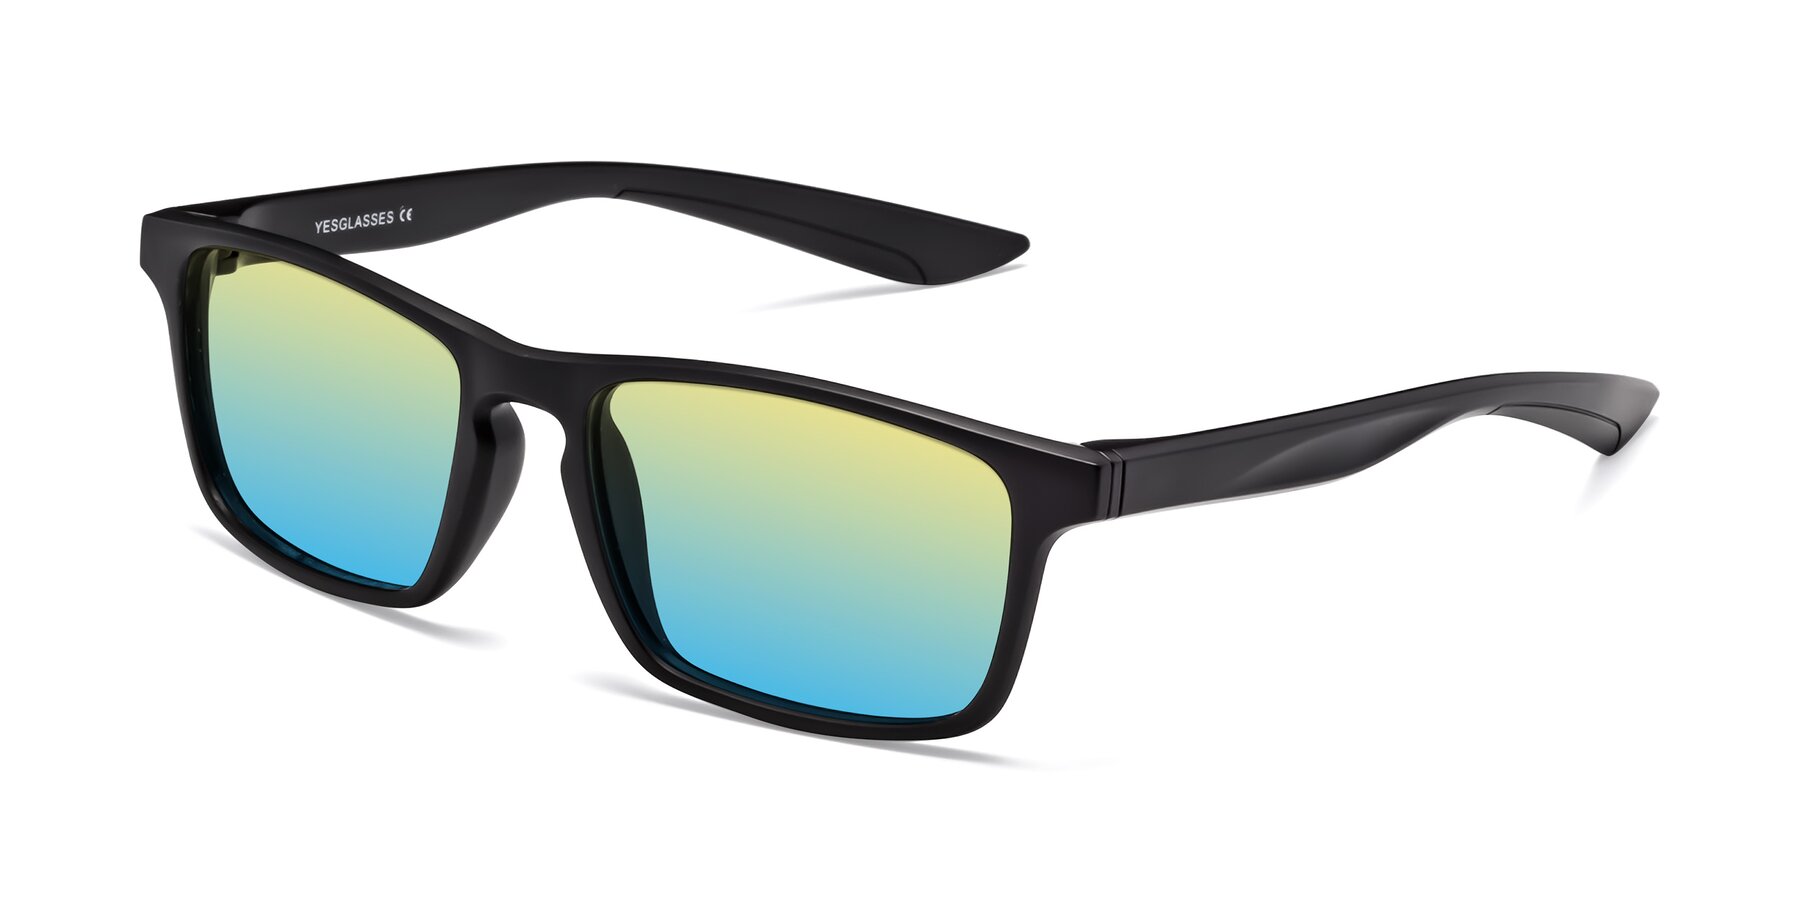 Angle of Passion in Matte Black with Yellow / Blue Gradient Lenses